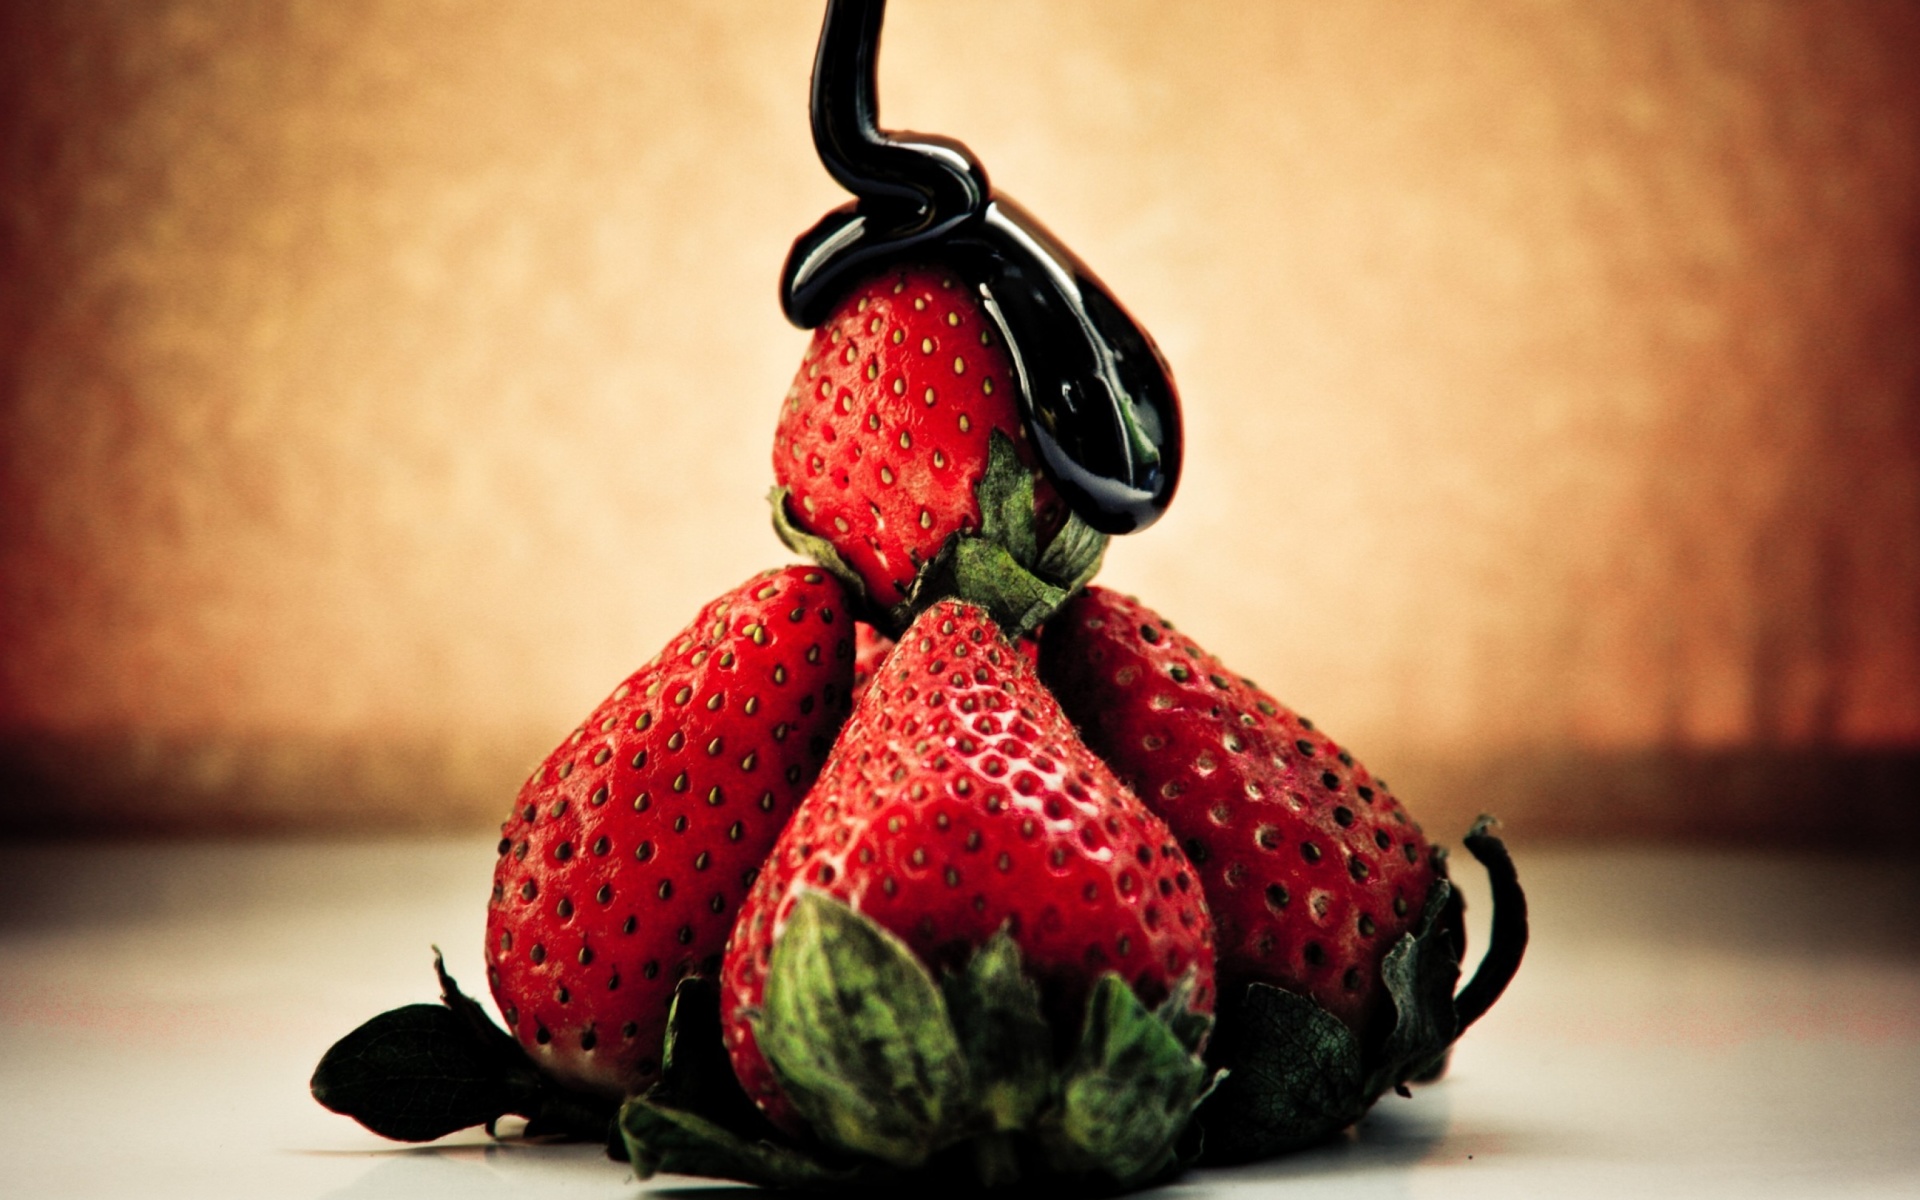 Das Strawberries with chocolate Wallpaper 1920x1200